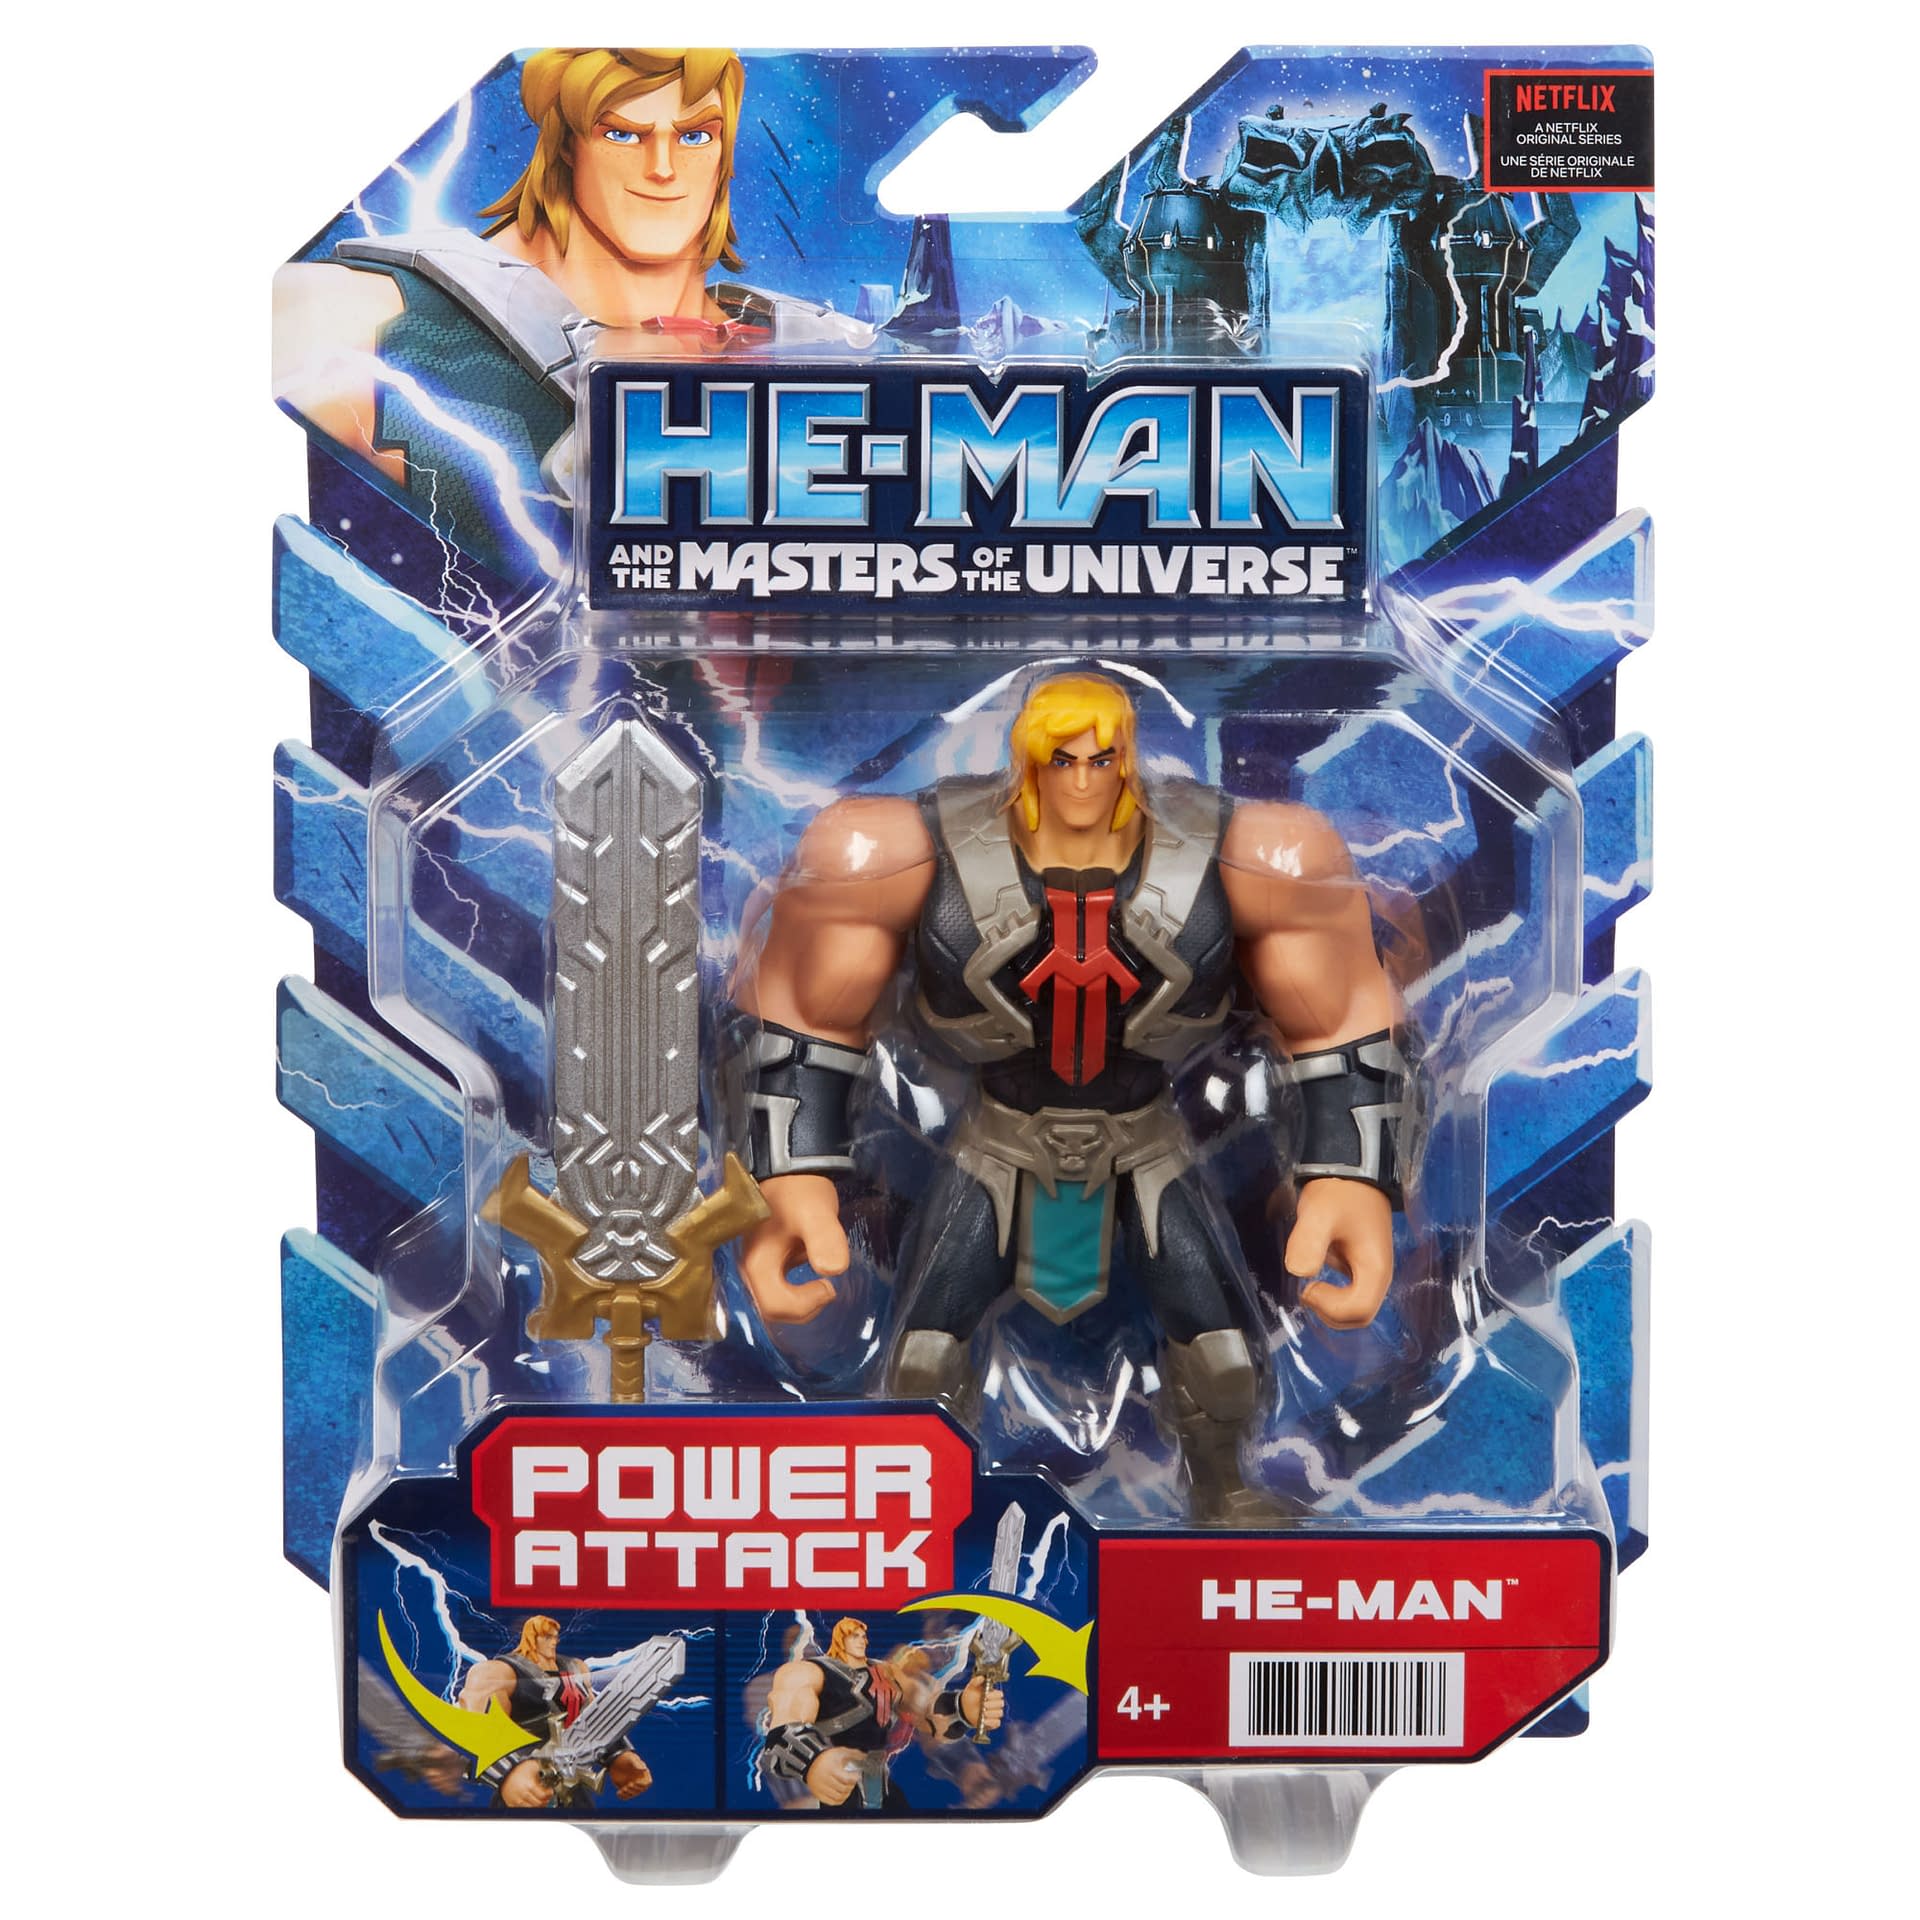 He-man masters of the universe ヒーマン-